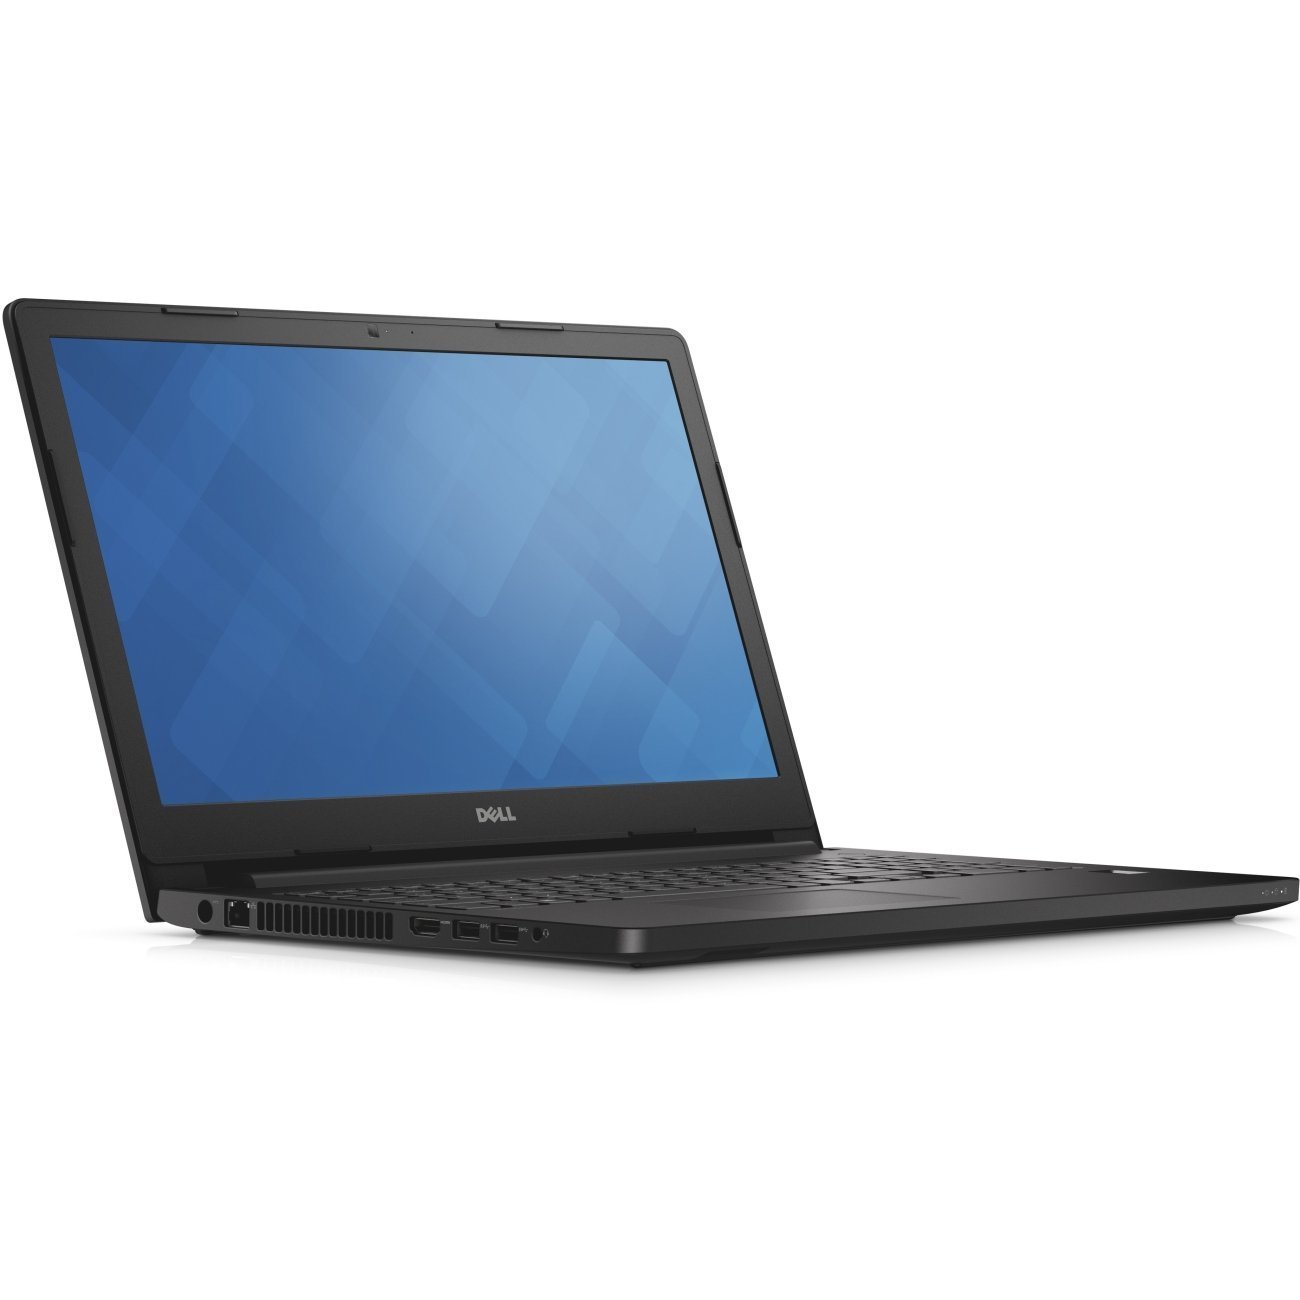 Wholesale dell latitude 3570 laptop bundle - core i7-6th gen, 8gb ram, 256gb ssd, 15.6-inch display, nvidia geforce 920m with charger